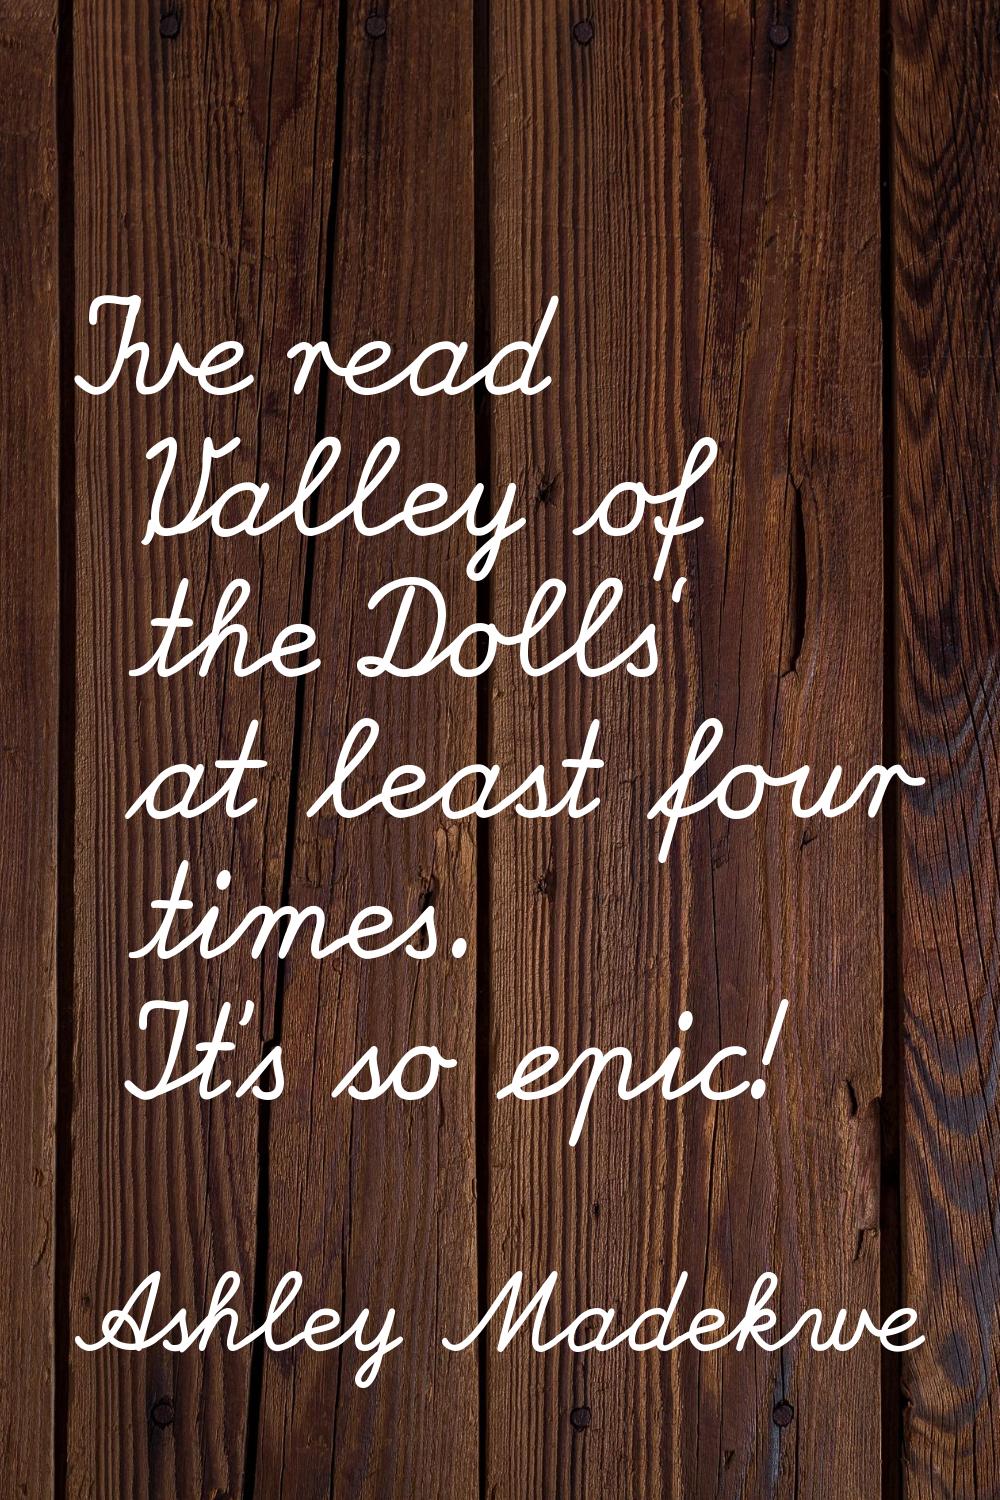 I've read 'Valley of the Dolls' at least four times. It's so epic!